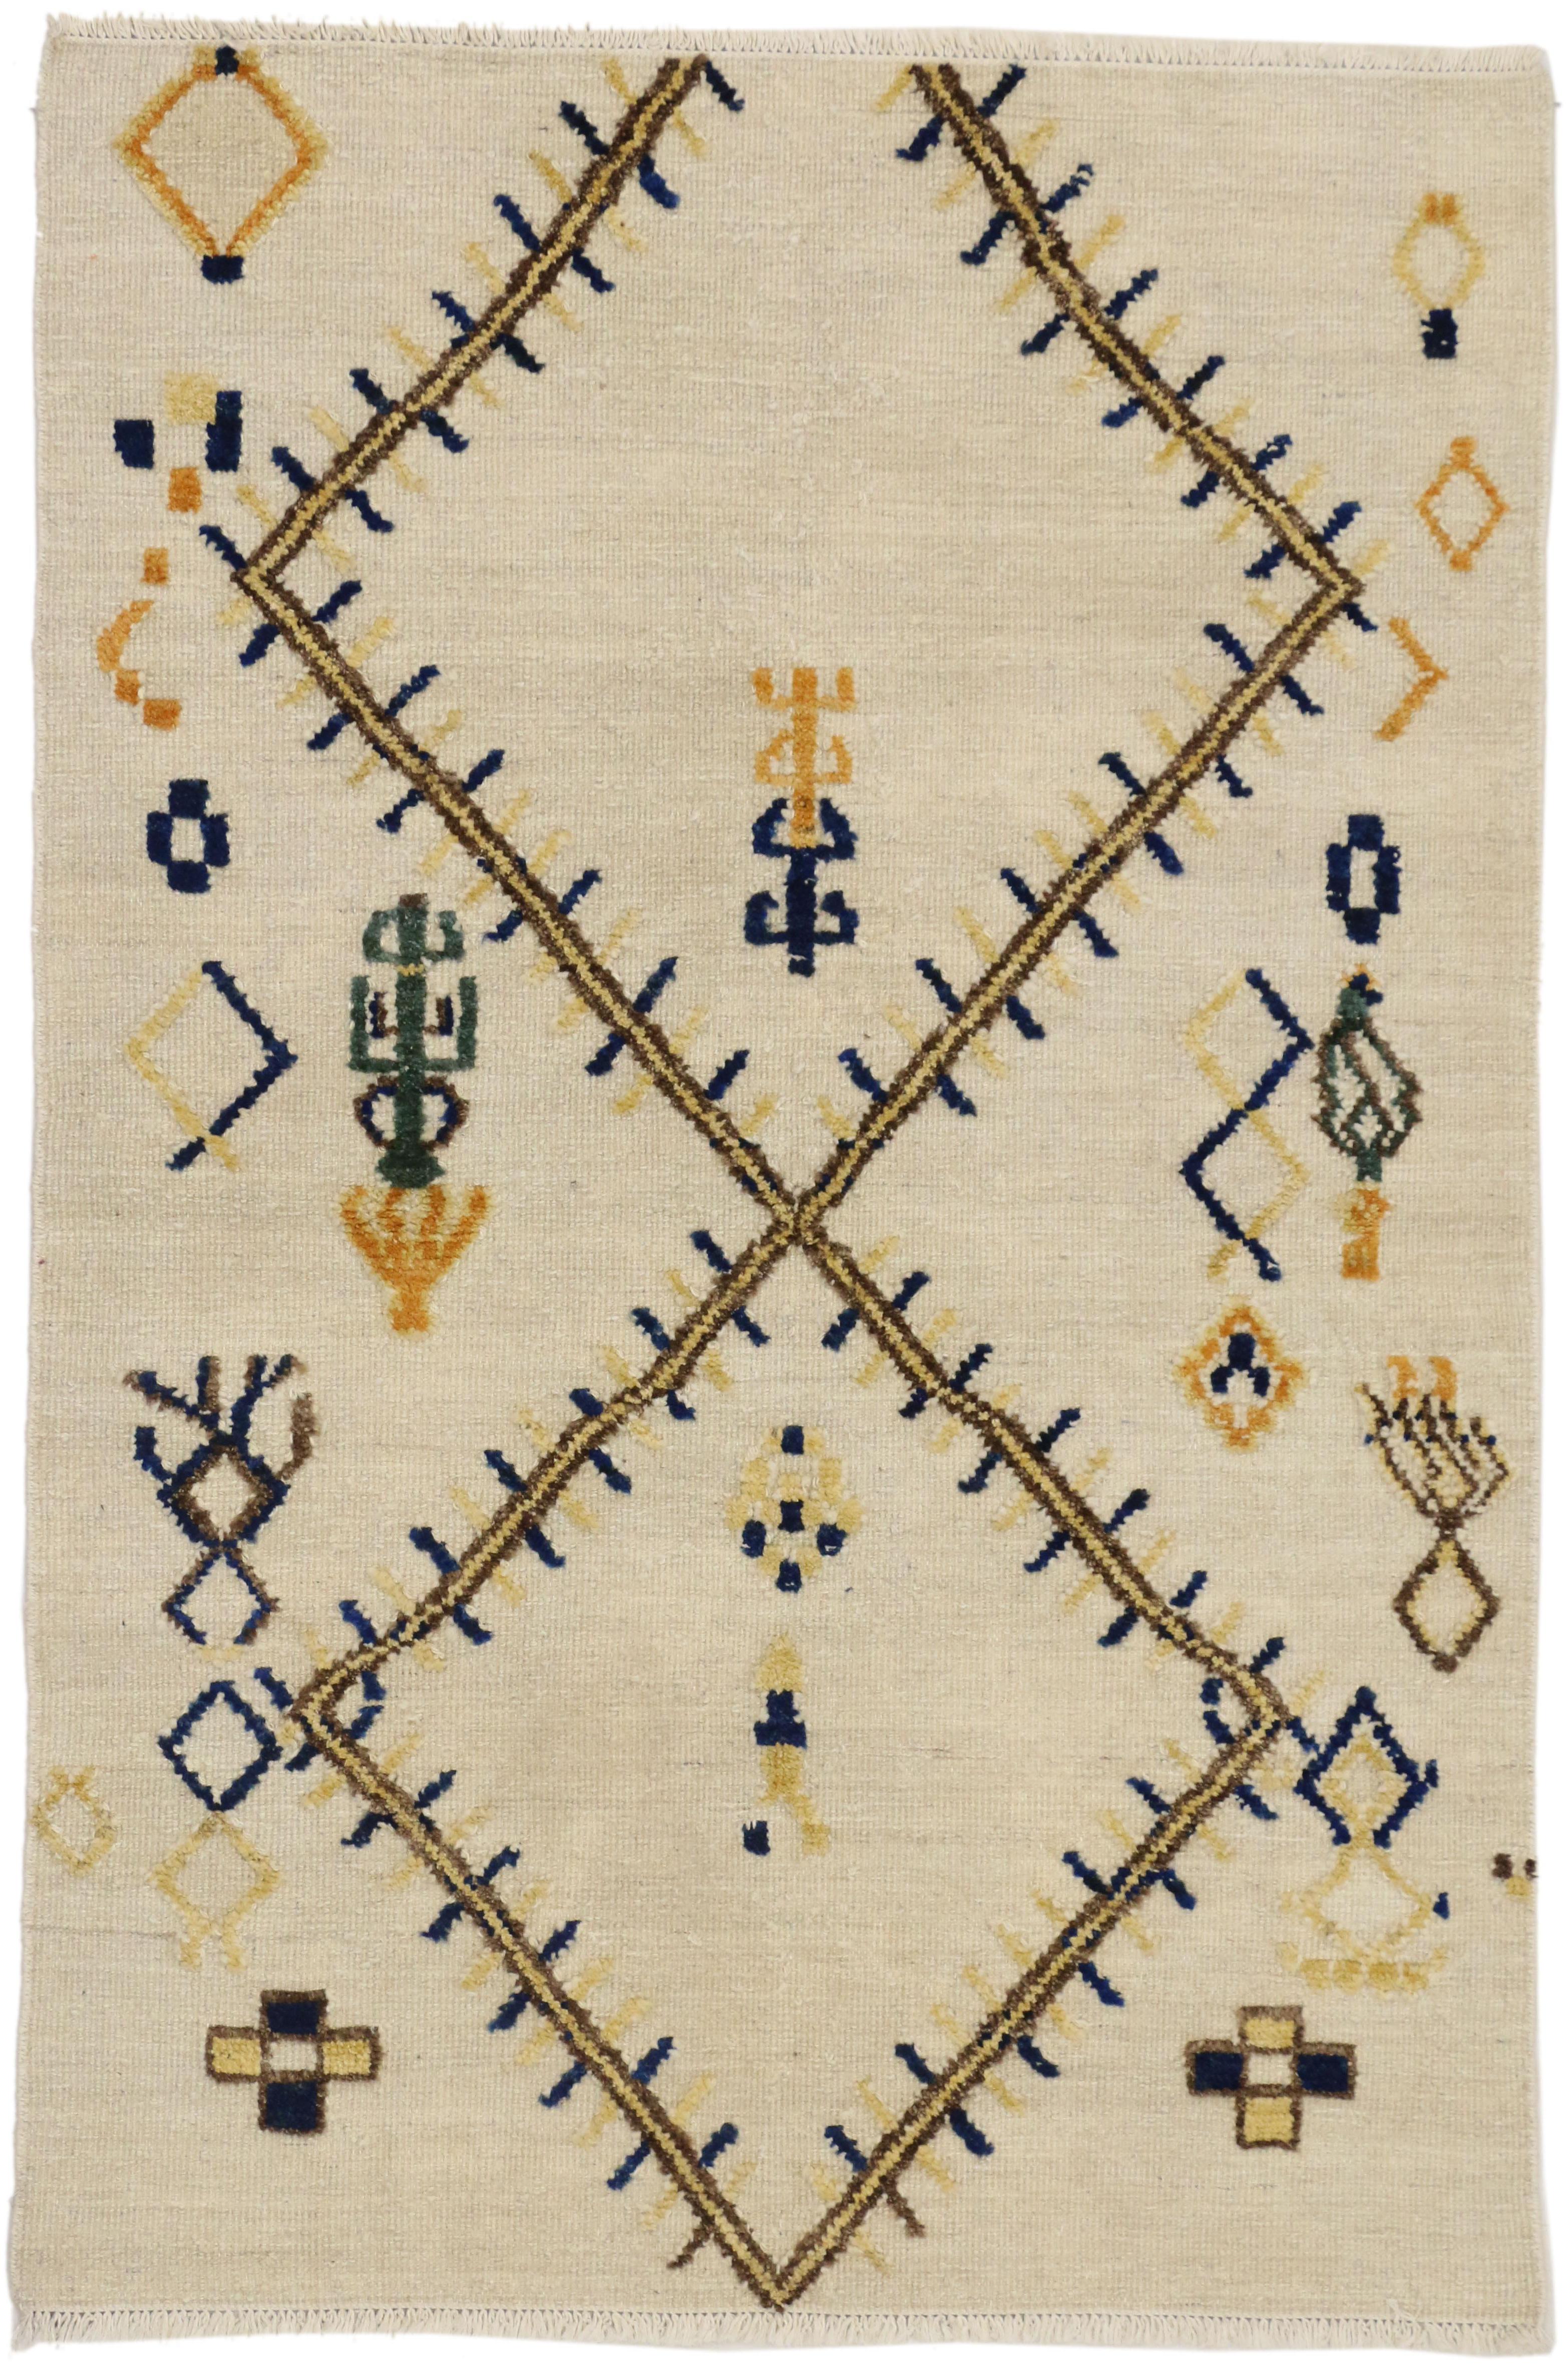 80300 New High and Low Texture Moroccan Style Rug, Tribal Accent Rug, Two-Layer Texture Rug. Woven with a clean and contemporary modern style, this Moroccan tribal style rug features a high and low pile while adding textural energy. With its random